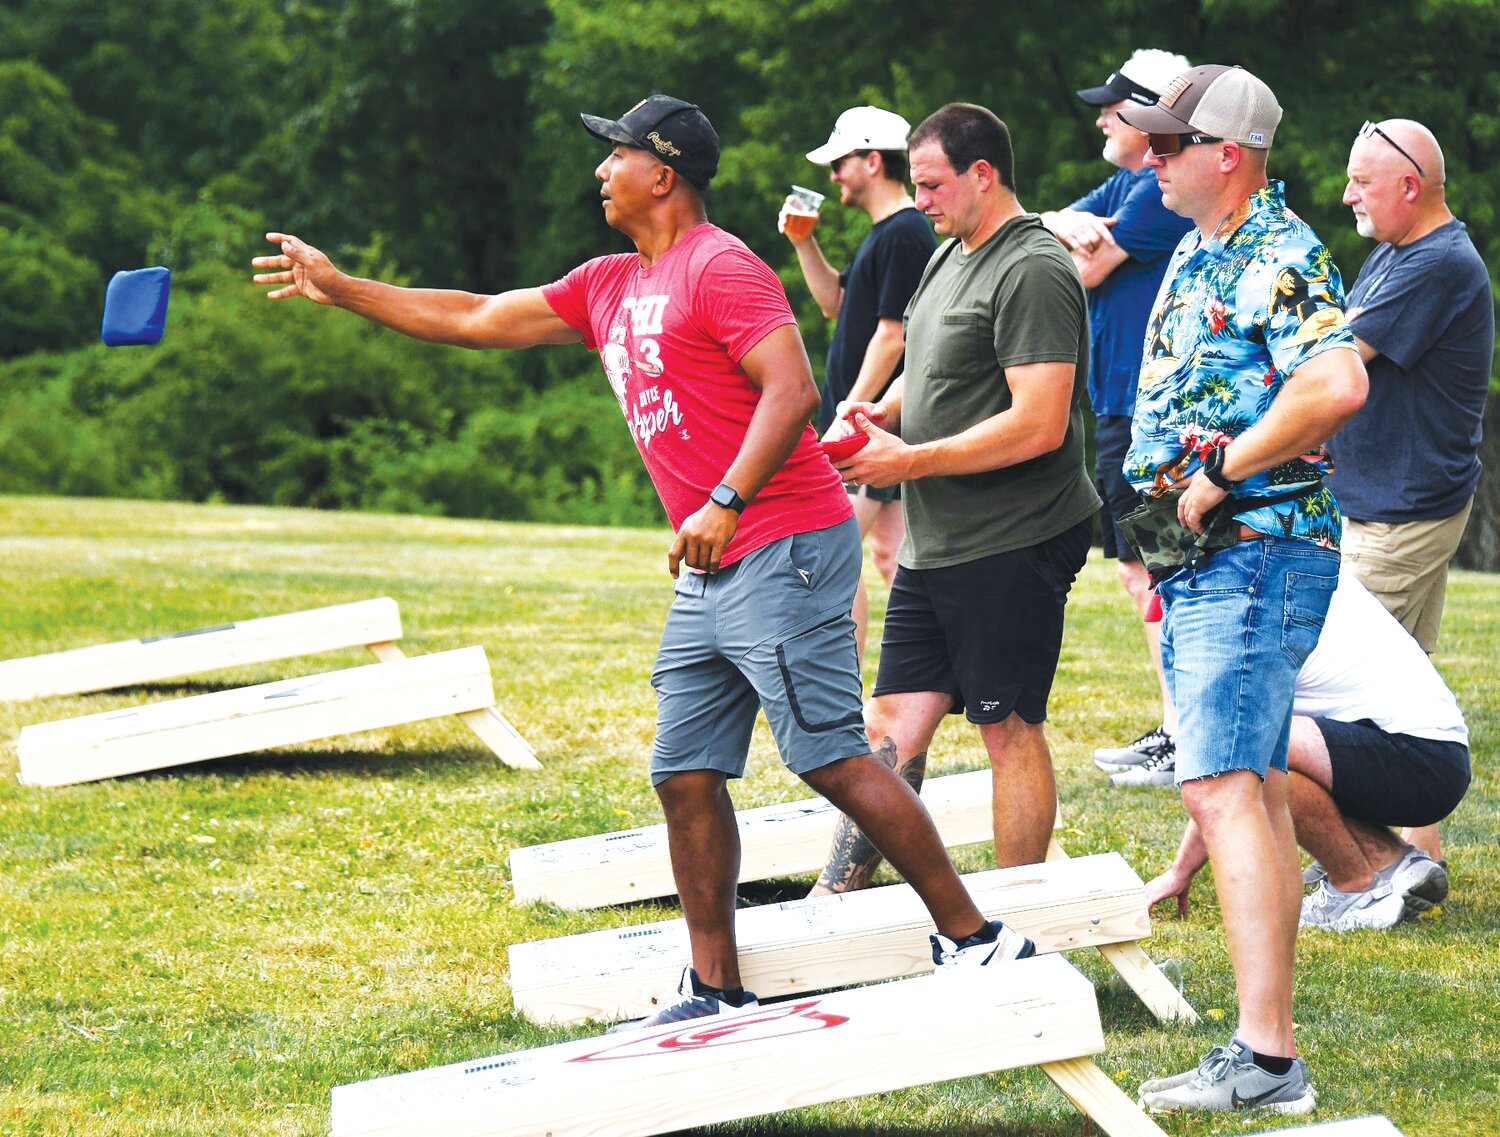 Win Young tosses a bean bag at the inaugural  Cornhole Tournament that raises money for the Families Behind the Badge Children’s Foundation.